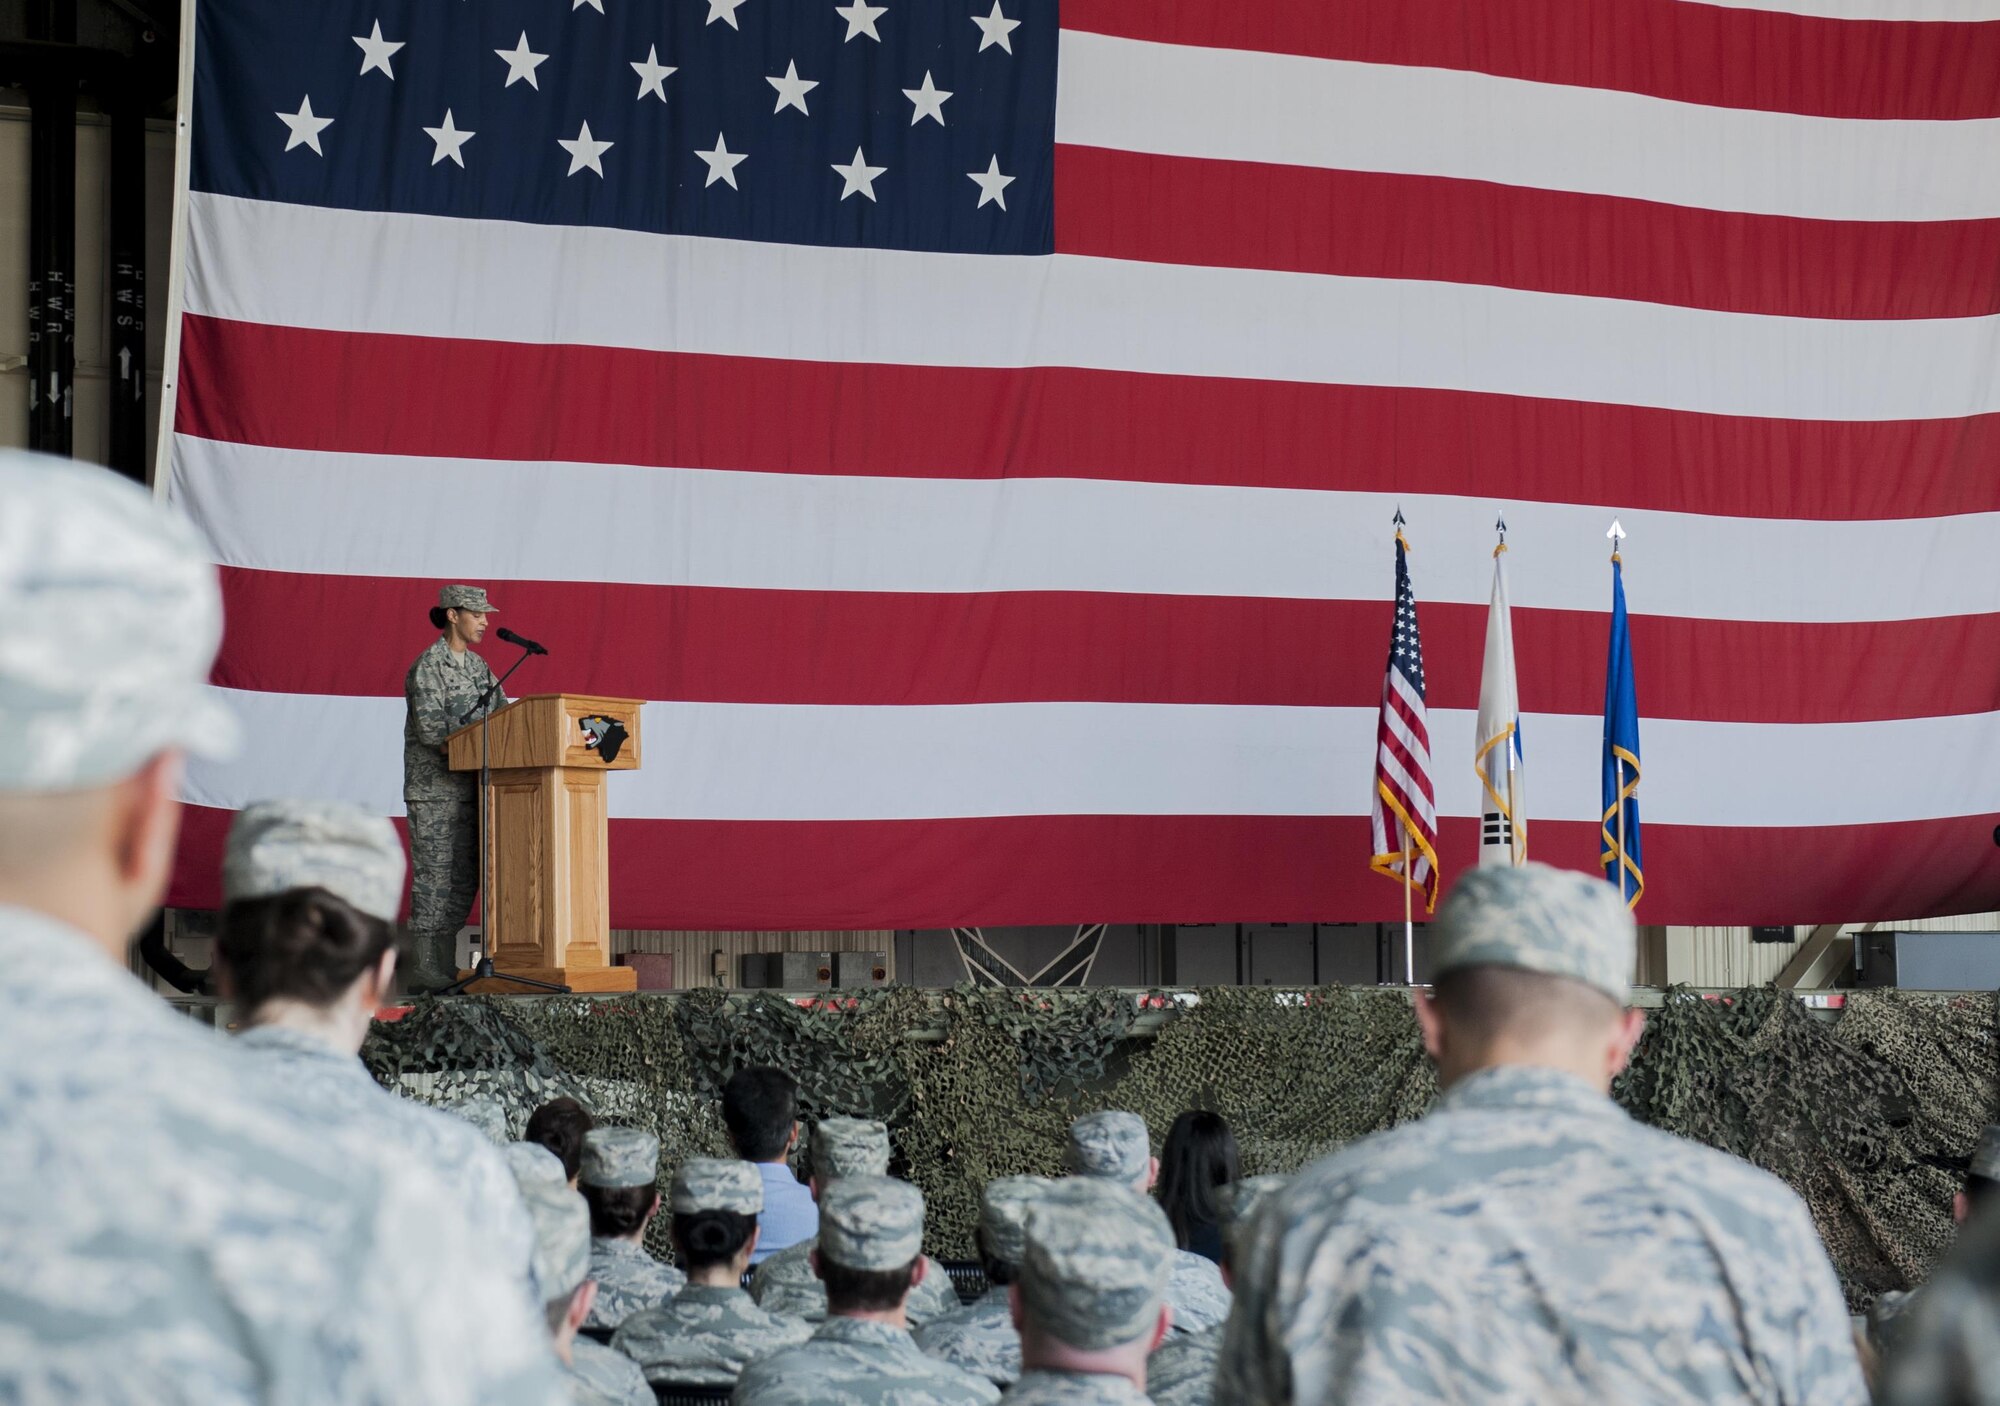 U.S. Air Force Col. Joann V. Palmer, 8th Medical Group commander, speaks to the 8th Fighter Wing during a change of command ceremony at Kunsan Air Base, Republic of Korea, June 23, 2017. Palmer took command of the 8th MDG from Col. Lisa A. Davison and upon assuming the position, received the title of “Hawk.” (U.S. Air Force photo by Senior Airman Colville McFee/Released)